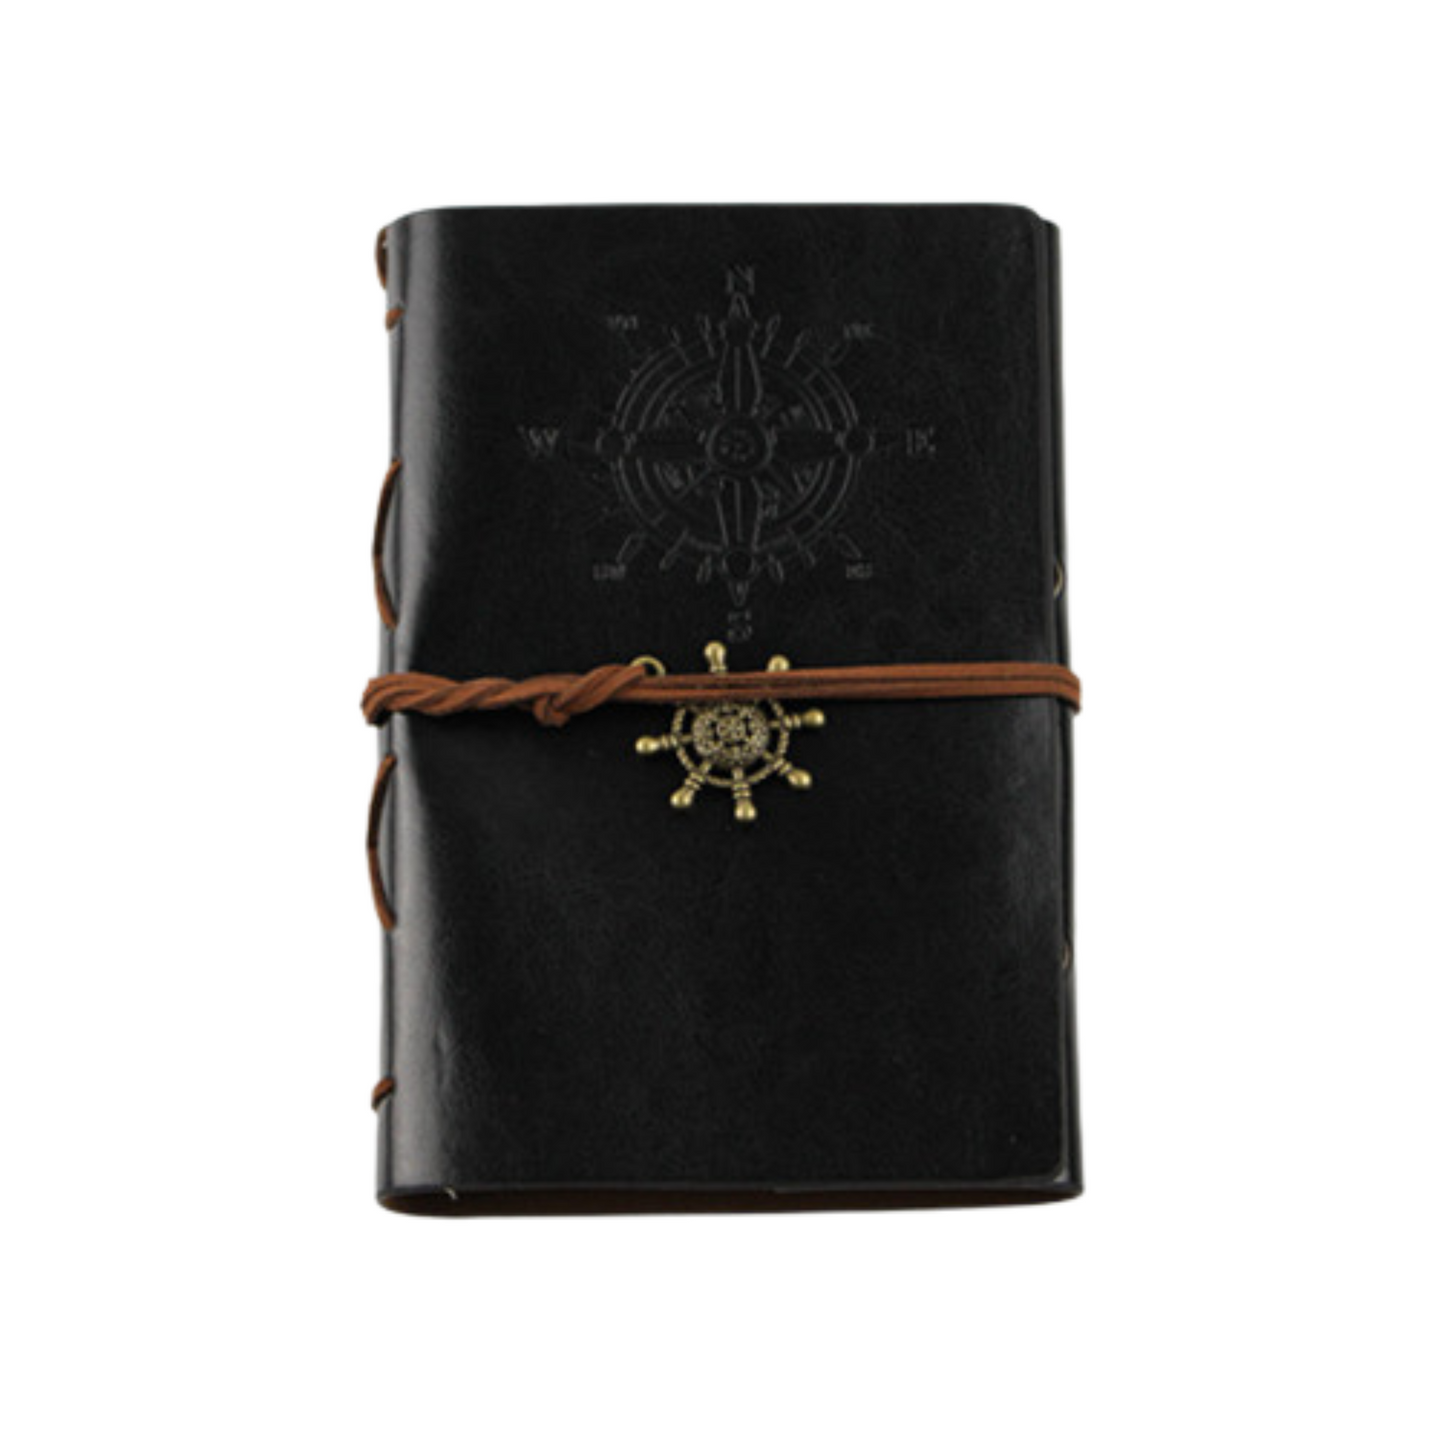 Genuine Leather Bound Journal Travel Diary Note Sketch Book